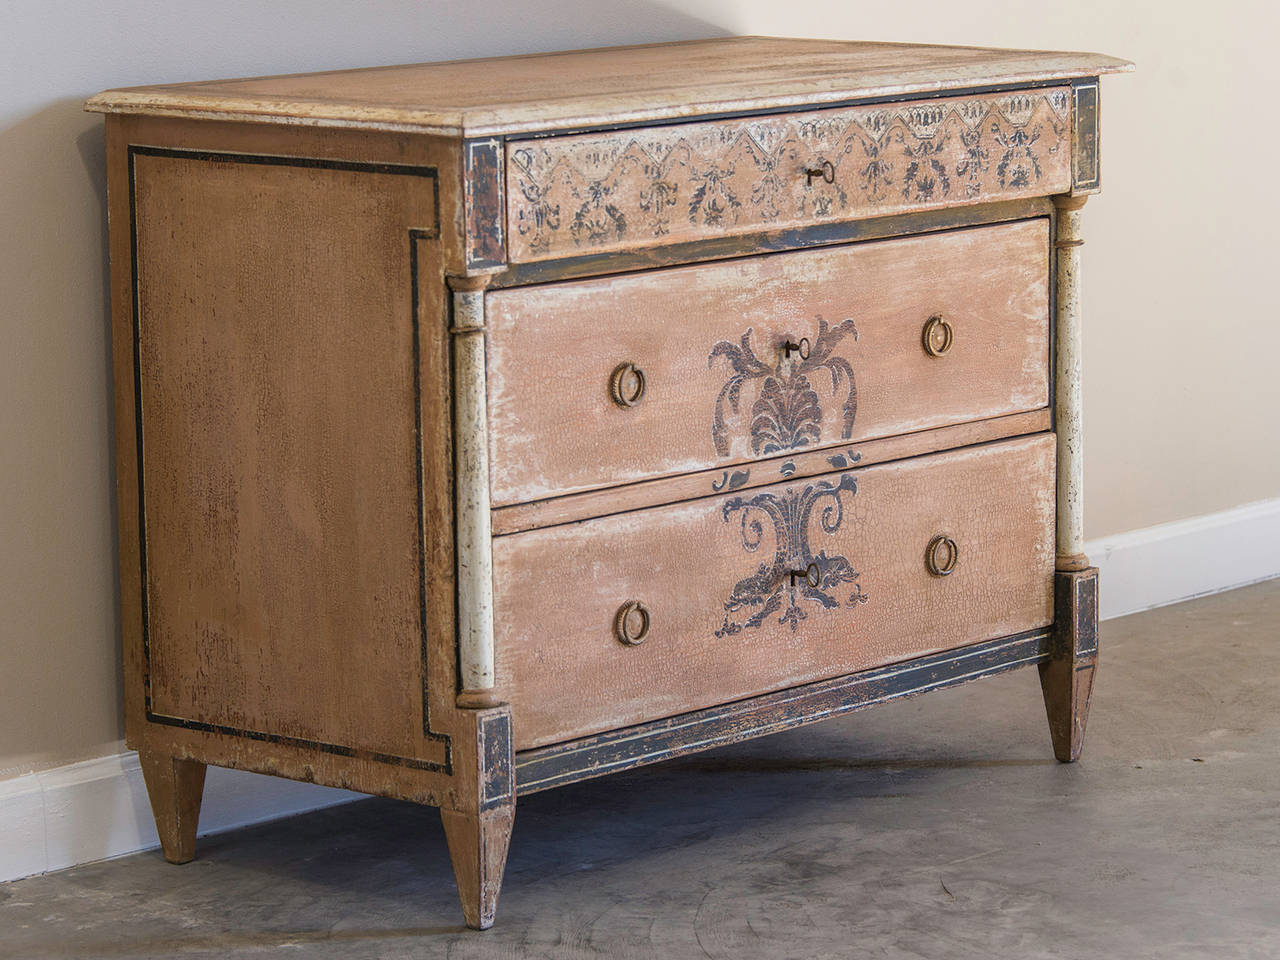 Empire Period Neoclassical Chest of Drawers, Germany c.1820, Painted Decoration. This handsome chest features a half column on both the left and right sides that flank the middle and lower drawer and support the top drawer that extends further